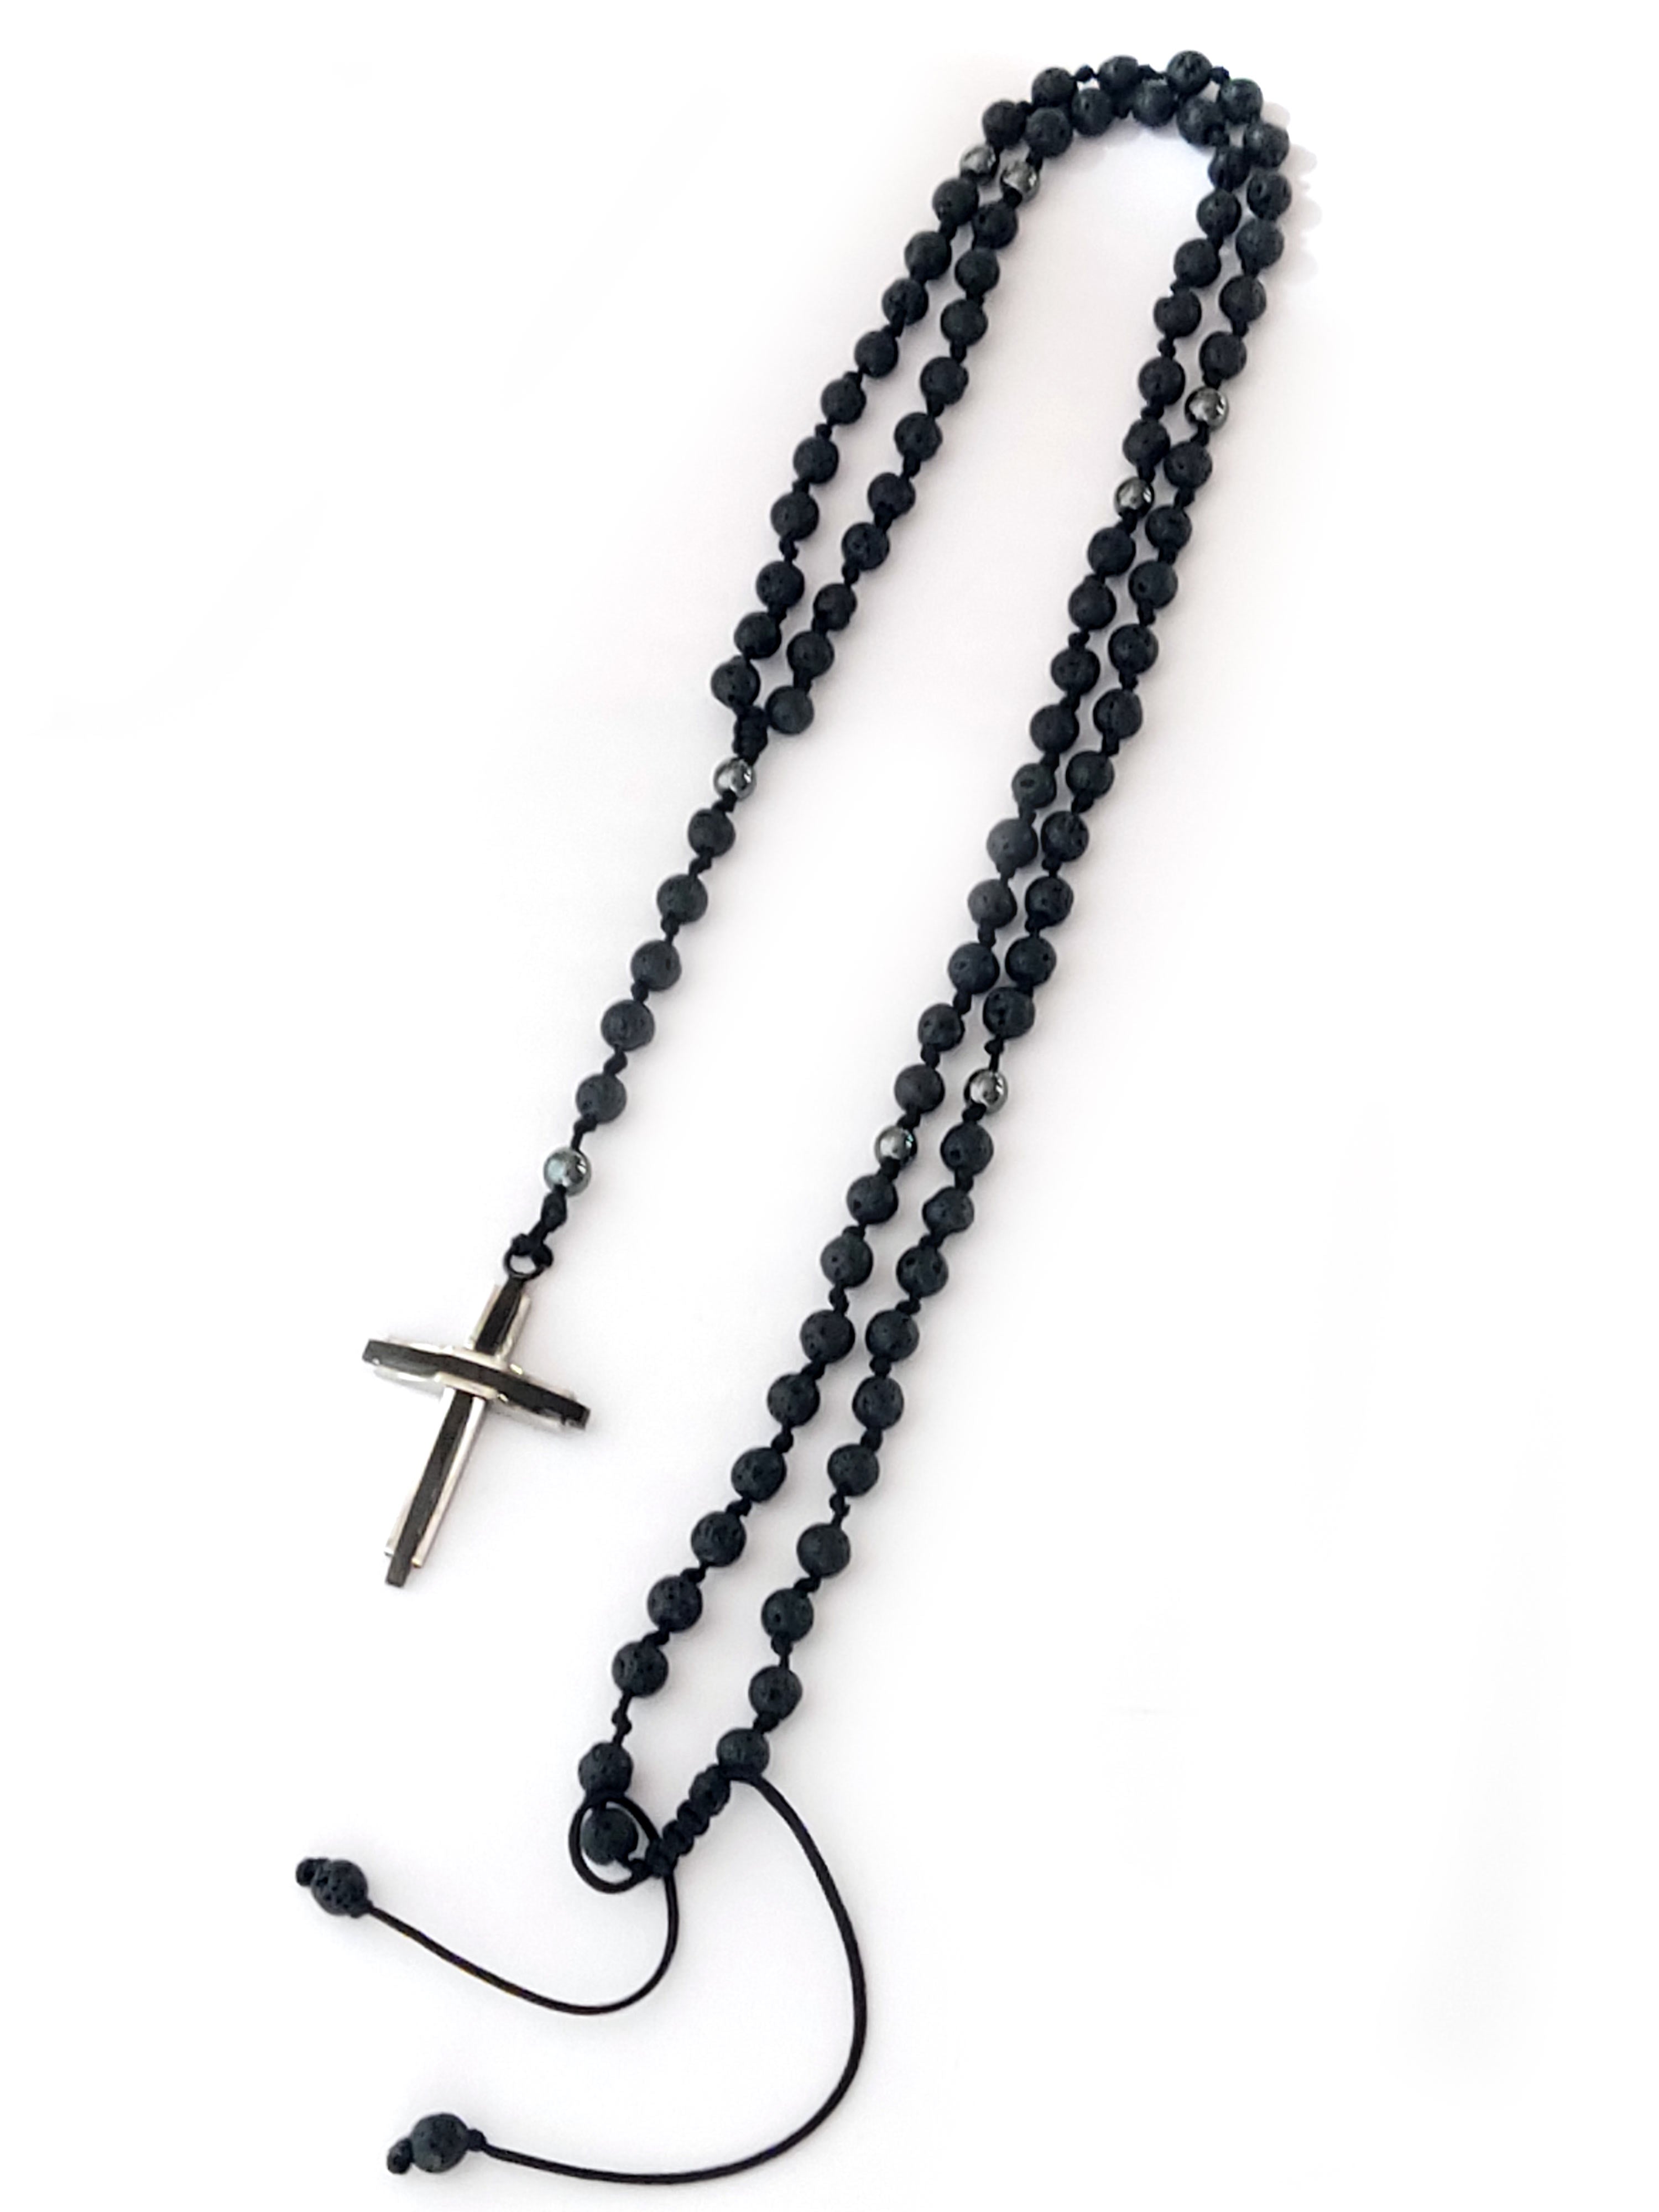 Stainless Steel Rosary Beads : Black